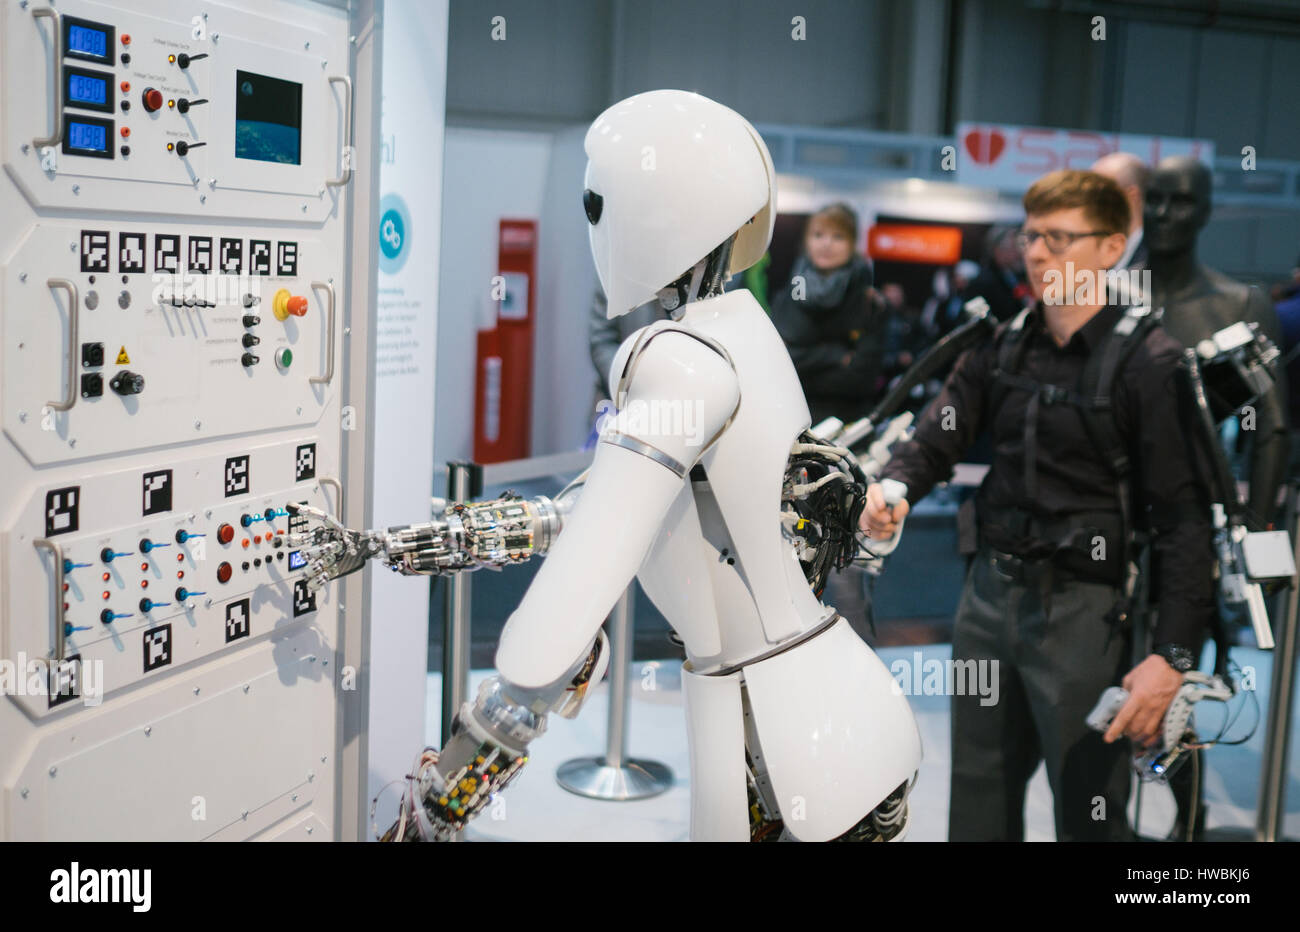 Hanover, Germany. 20th Mar, 2017. An employee of Robotic Innovation Center controls the robot AILA using an exoskeleton at the stand of the German Research Center for Artificial Intelligence (DFKI) at the CeBIT fair in Hanover, Germany, 20 March 2017. The IT fair CeBIT opens on 20 March 2017 and wants to convince its audience with specific application examples of new technologies. More than 3,000 exhibitors from 70 countries expect roughly 200,000 visitors at the five-day show from 20 to 24 March. Photo: Ole Spata/dpa/Alamy Live News Stock Photo